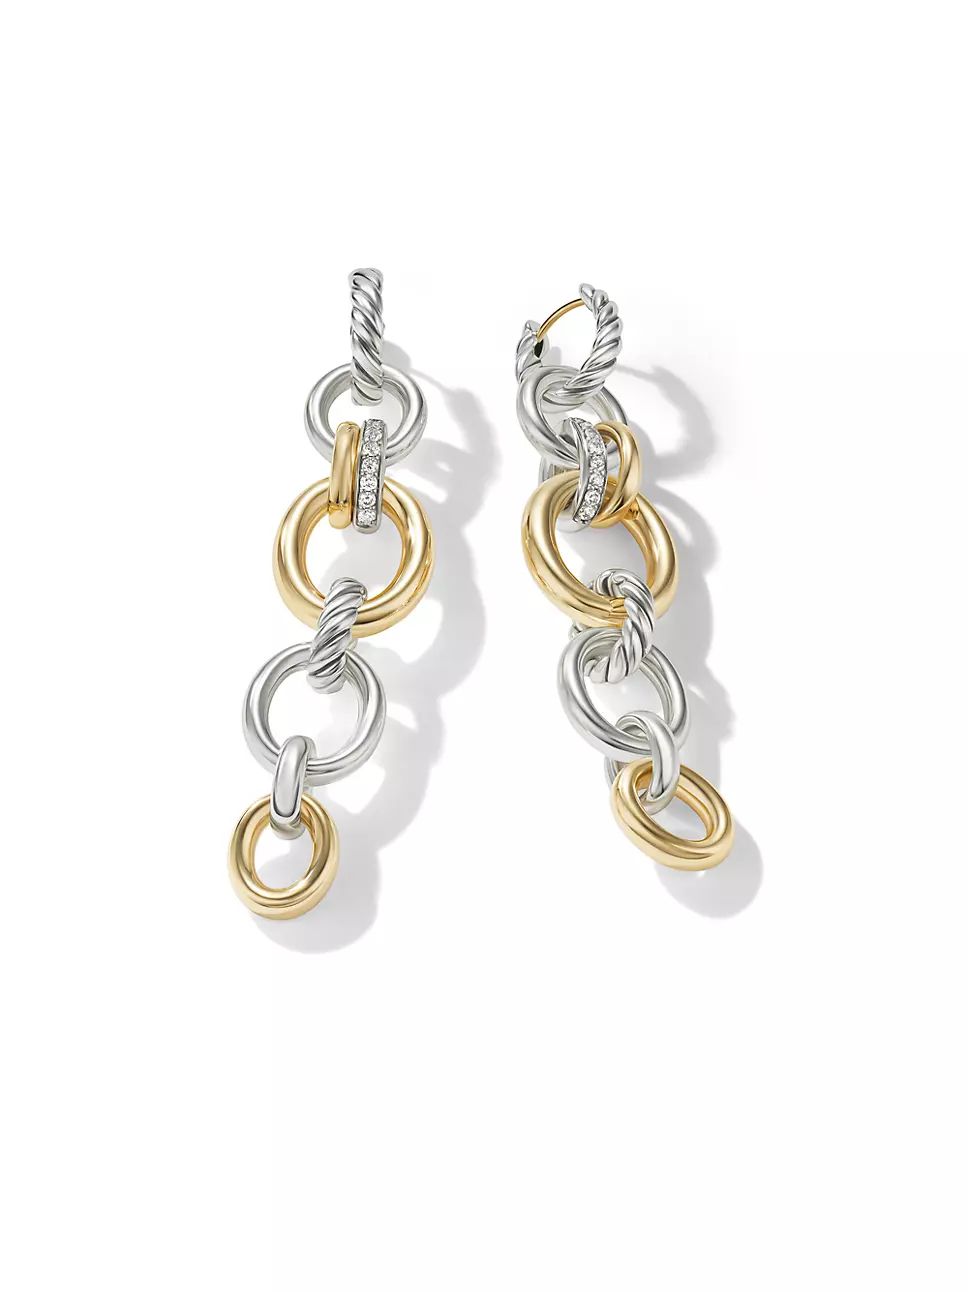 DY Mercer™ Linked Drop Earrings In Sterling Silver, 18K Yellow Gold And Pavé Diamonds | Saks Fifth Avenue